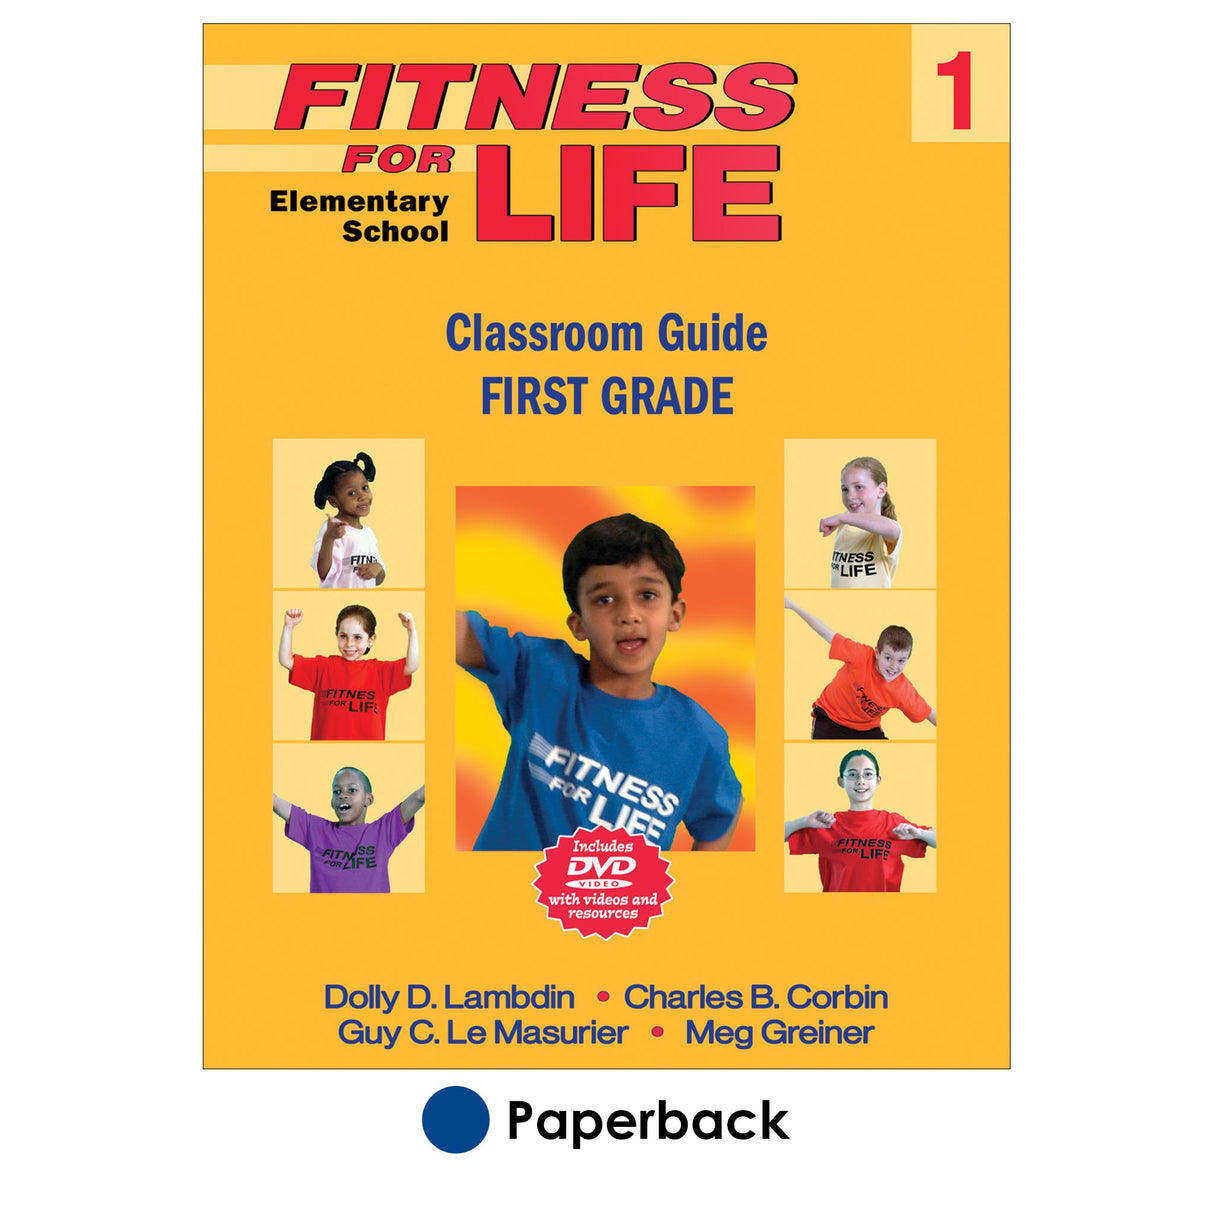 Fitness for Life Elementary School Classroom Guide: First Grade